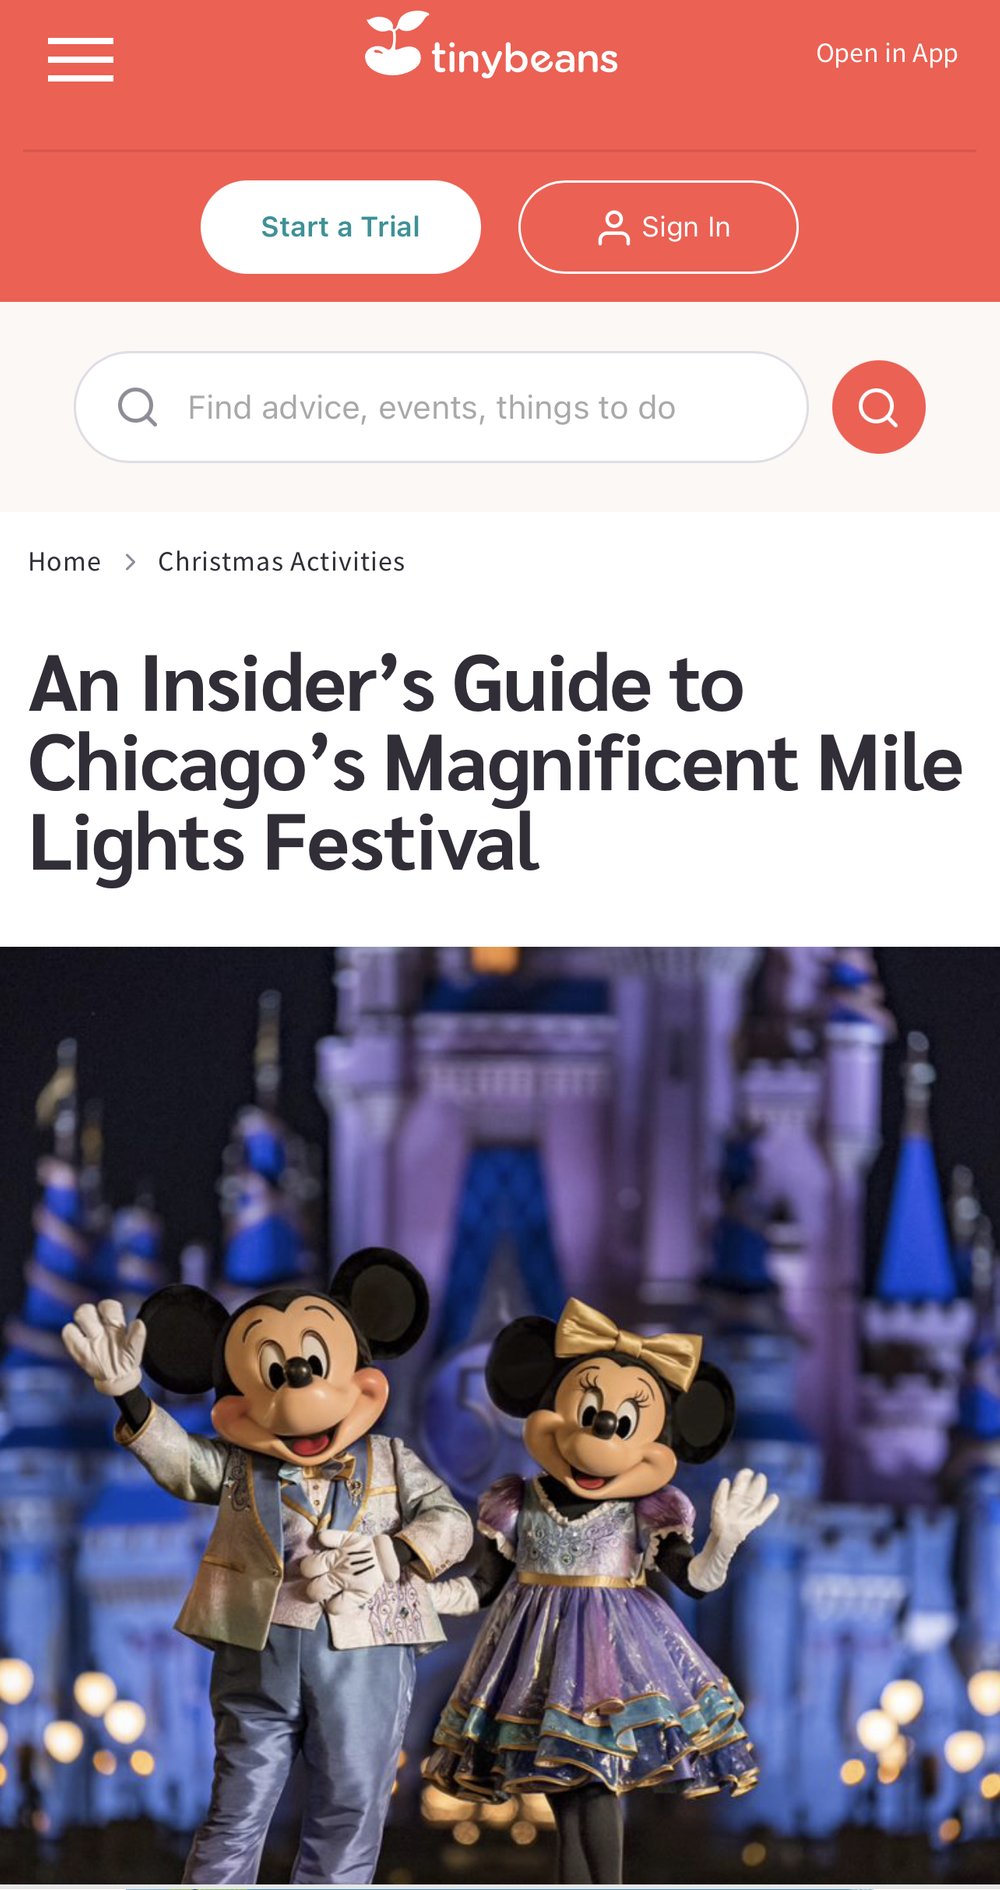 An Insider’s Guide to Chicago’s Magnificent Mile Lights Festival